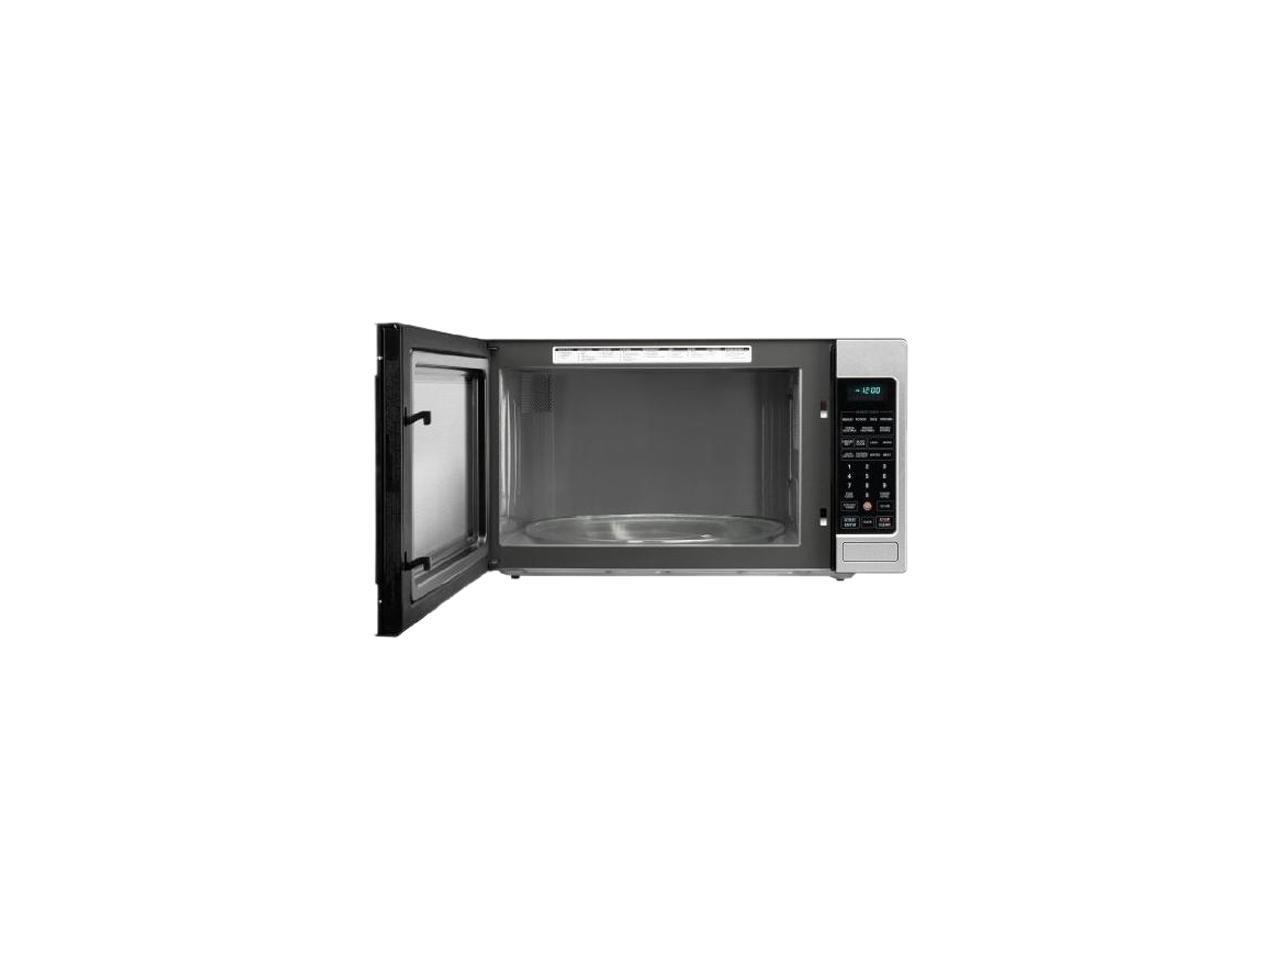 LG CounterTop Microwave Oven LCRT2010ST